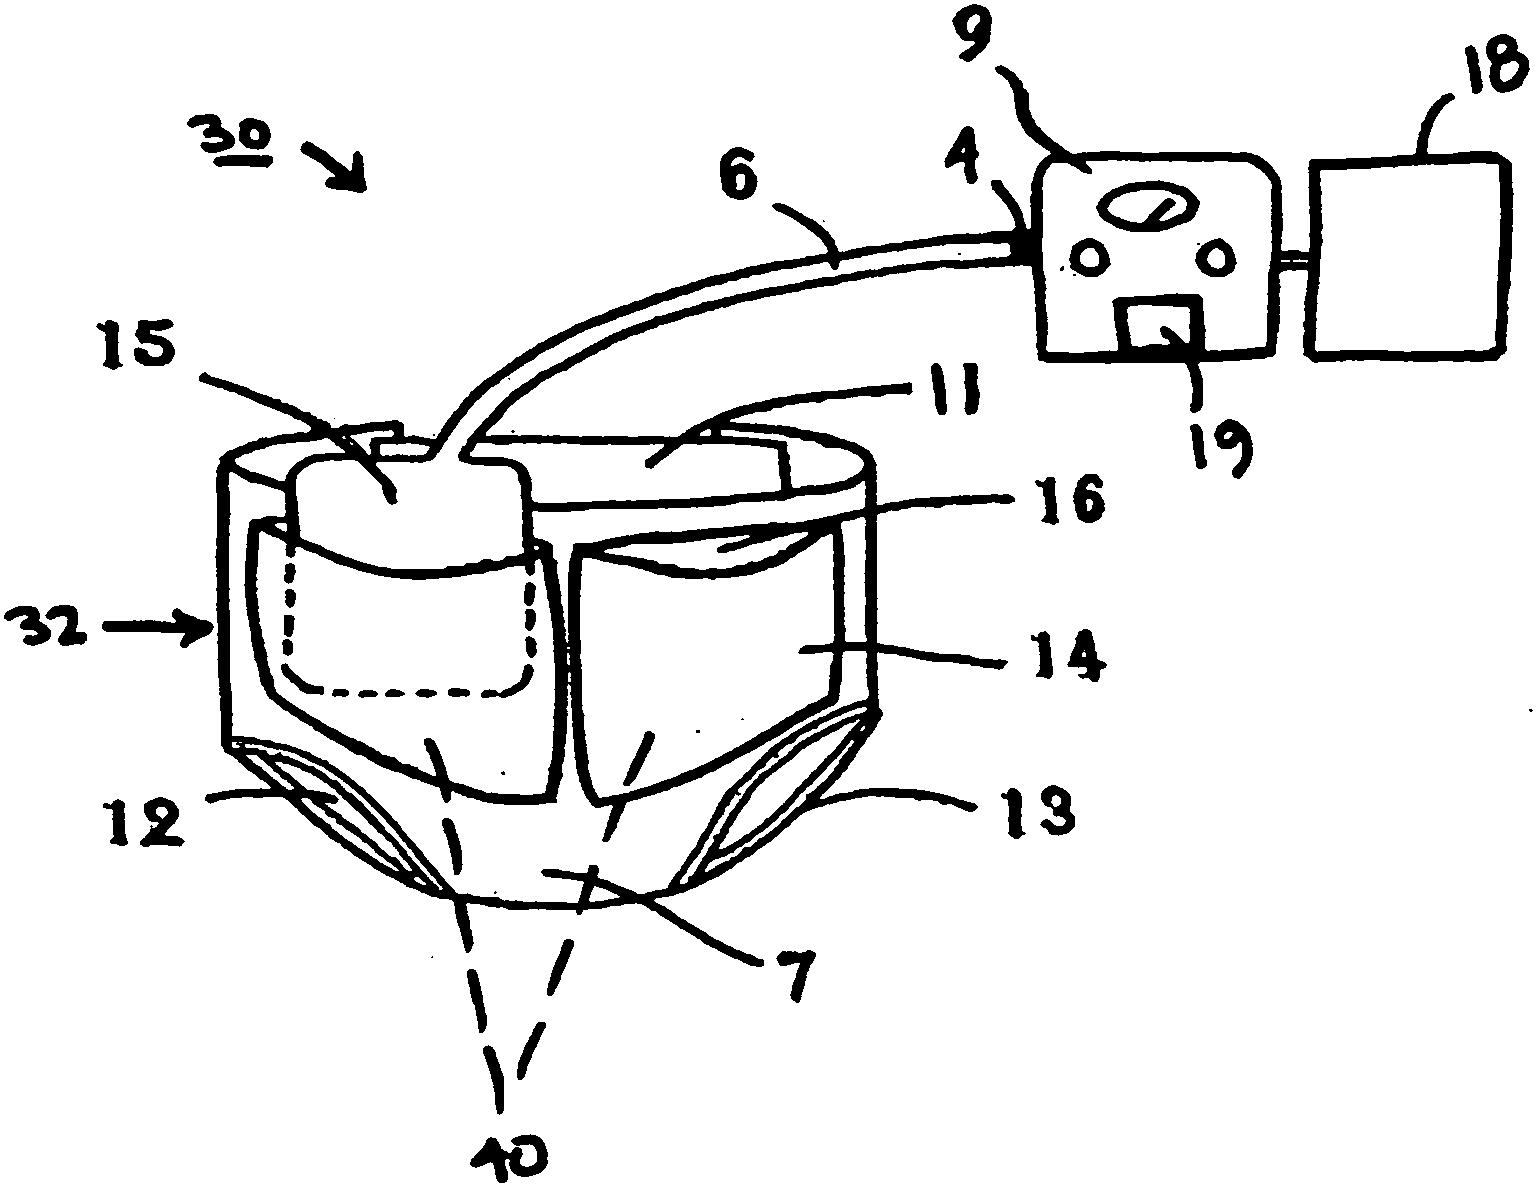 Apparatus for prevention and treatment of decubitus ulcers